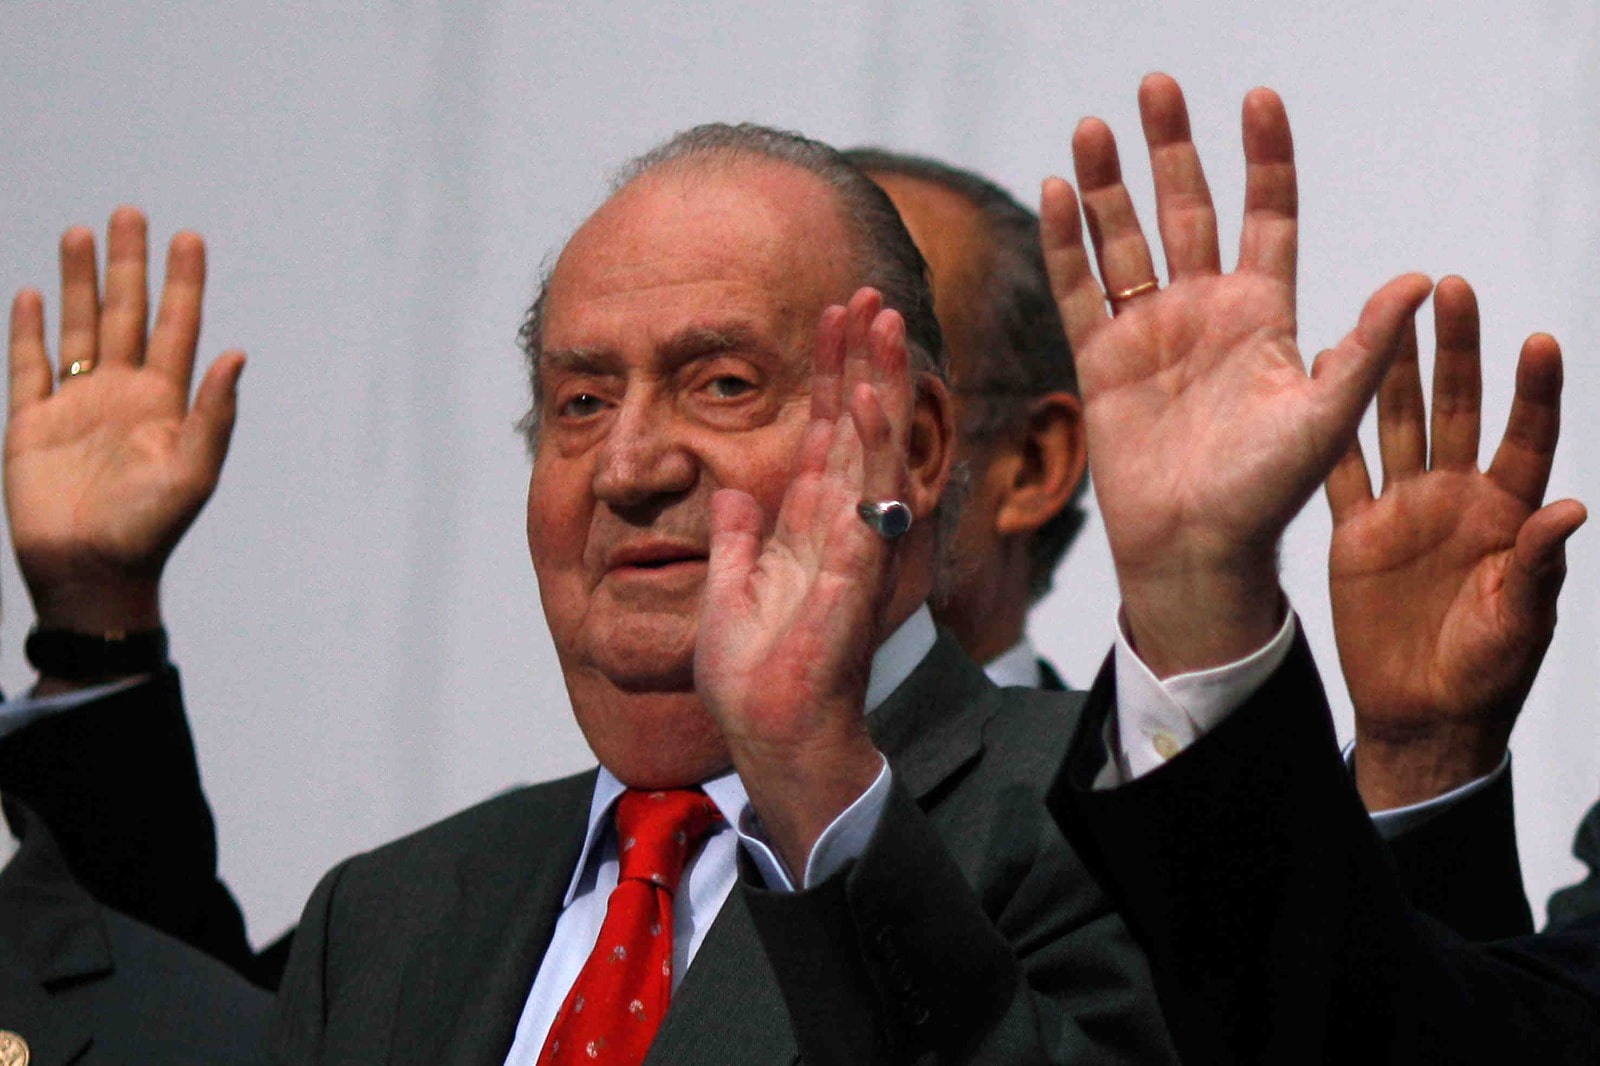 Former Spanish king, Juan Carlos, waves during a group photo with Ibero-American leaders during the Ibero-American Summit in Cadiz (by REUTERS/Jon Nazca)